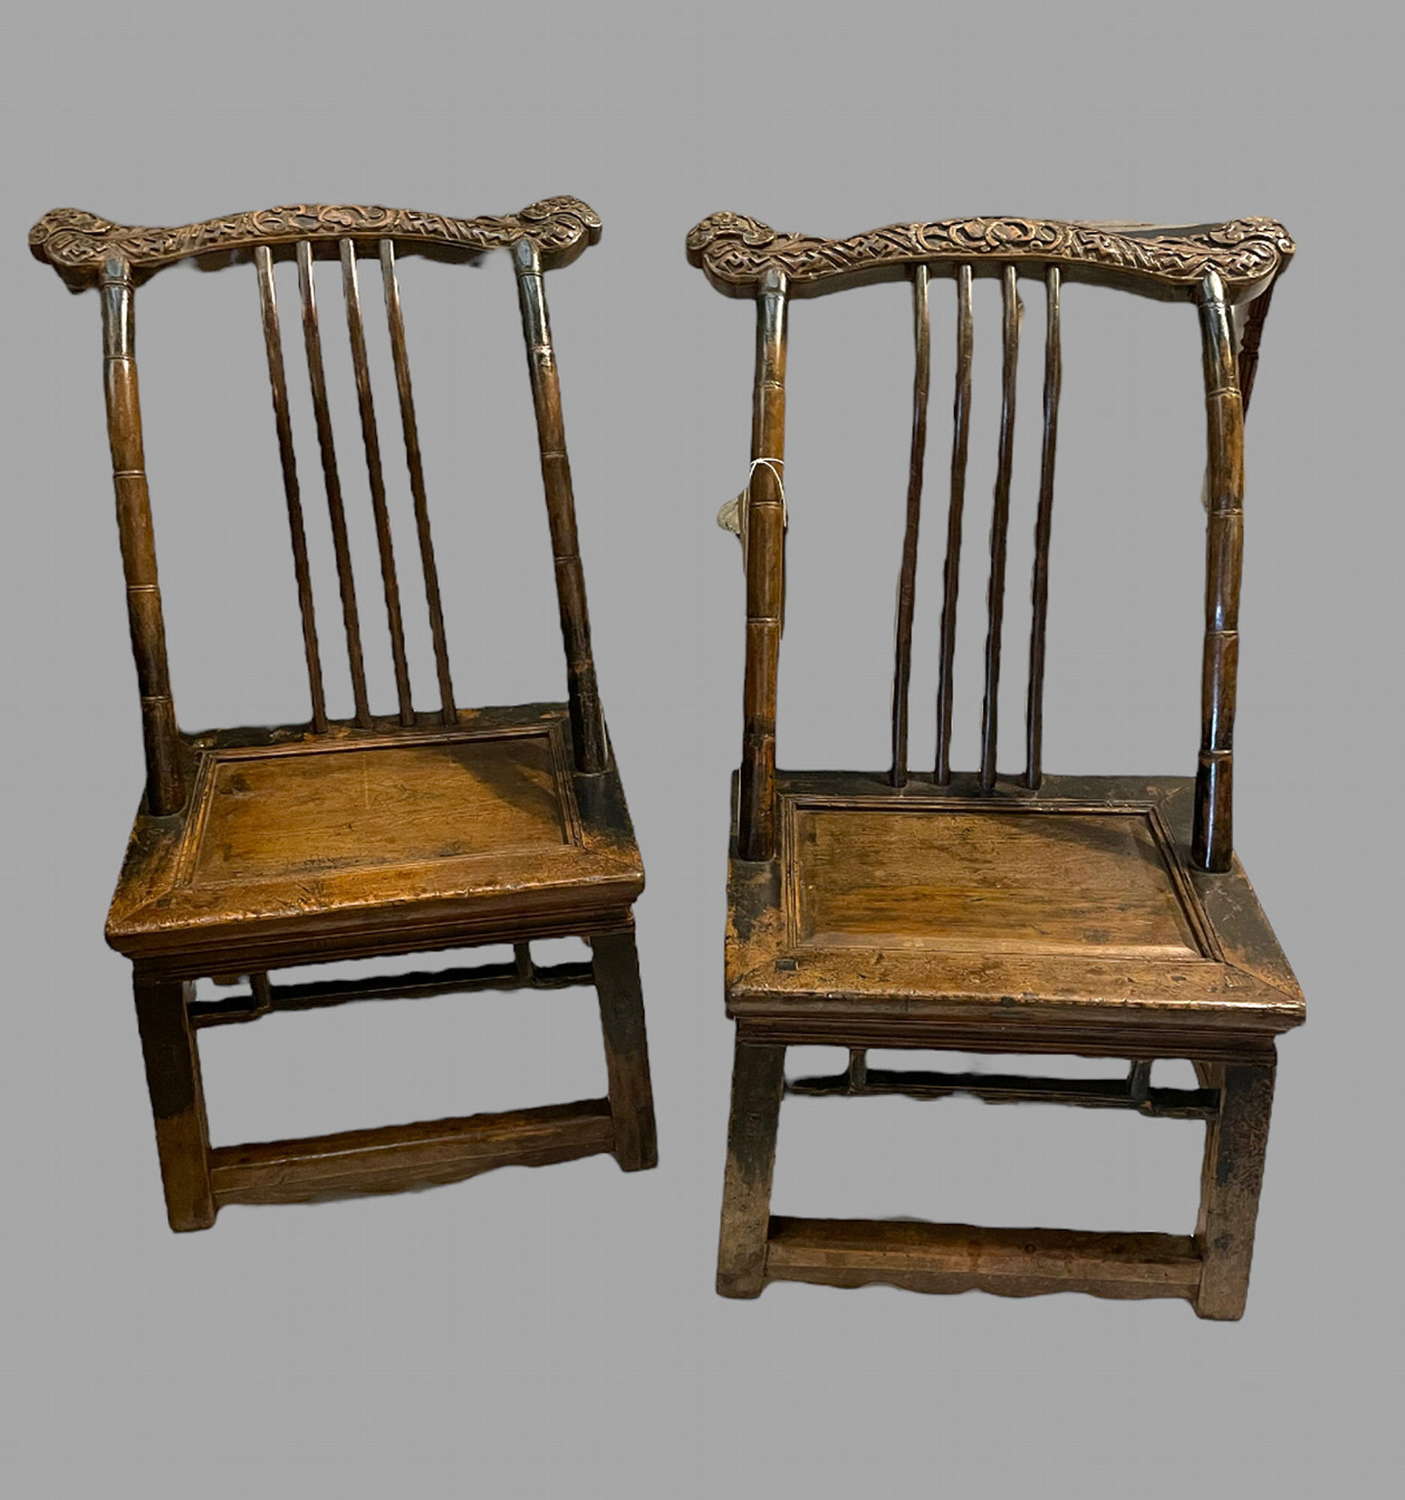 A Pair of 19thc Oriental Chairs